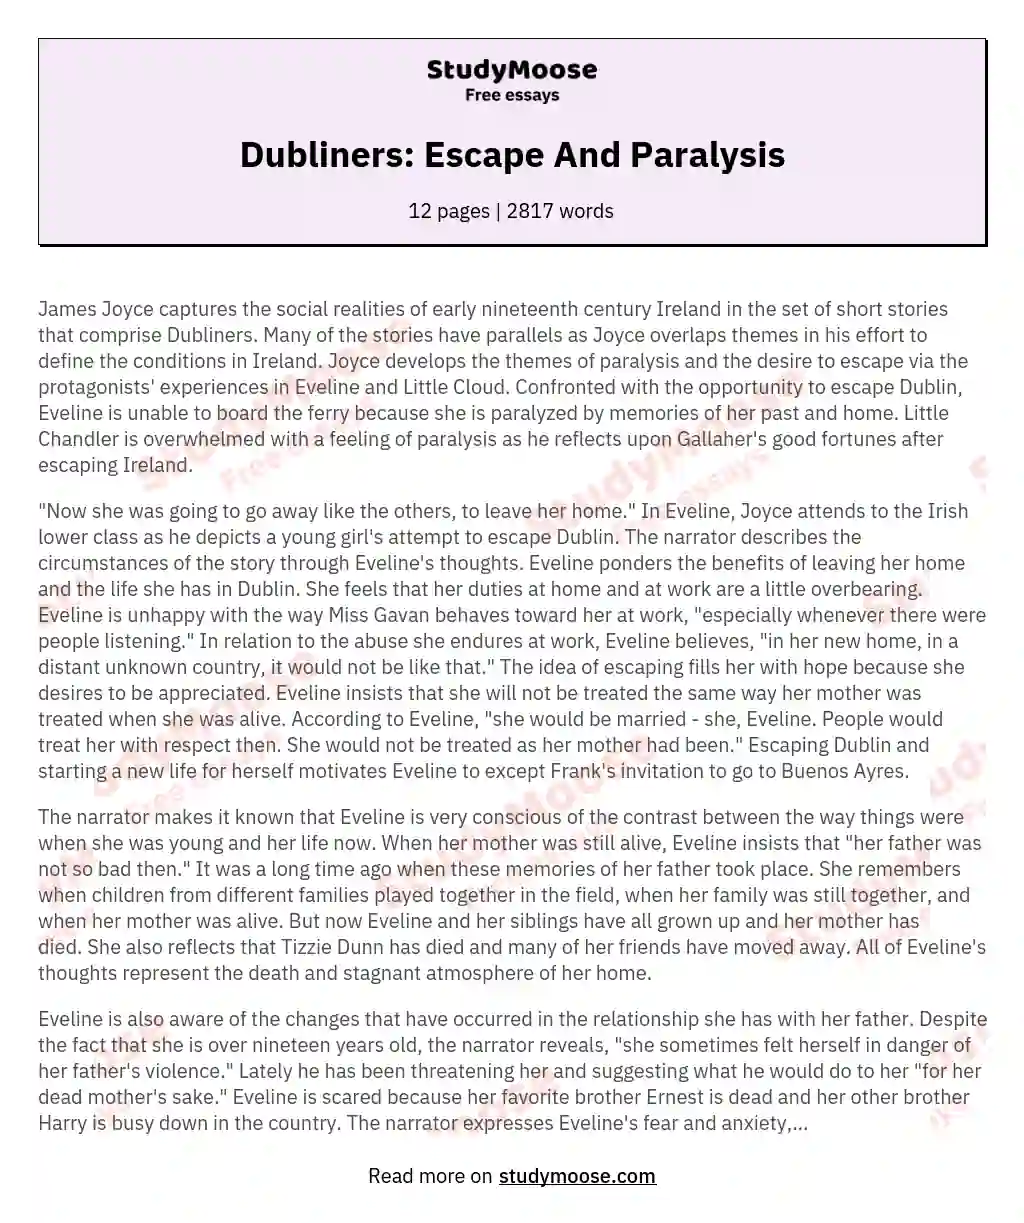 Dubliners: Escape And Paralysis essay